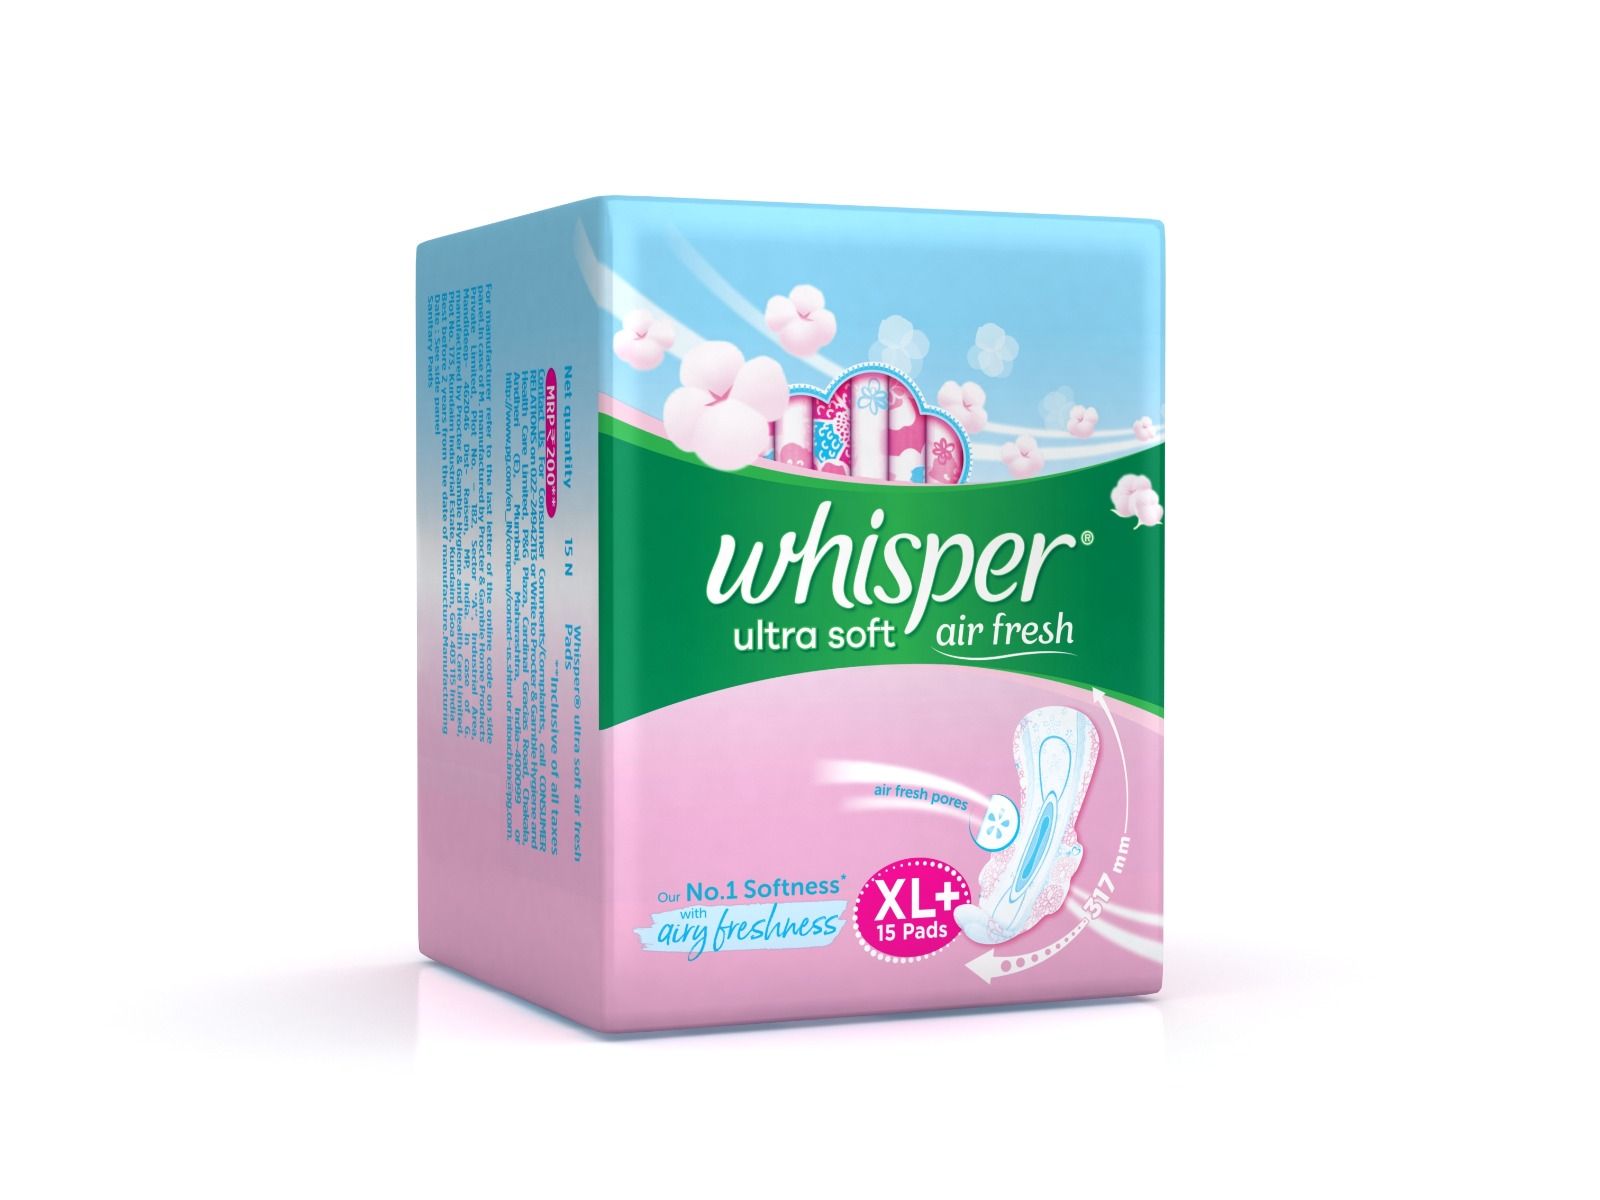 Whisper Ultra Soft Air Fresh Sanitary Pads, XL+, 15 Count, Pack of 1 